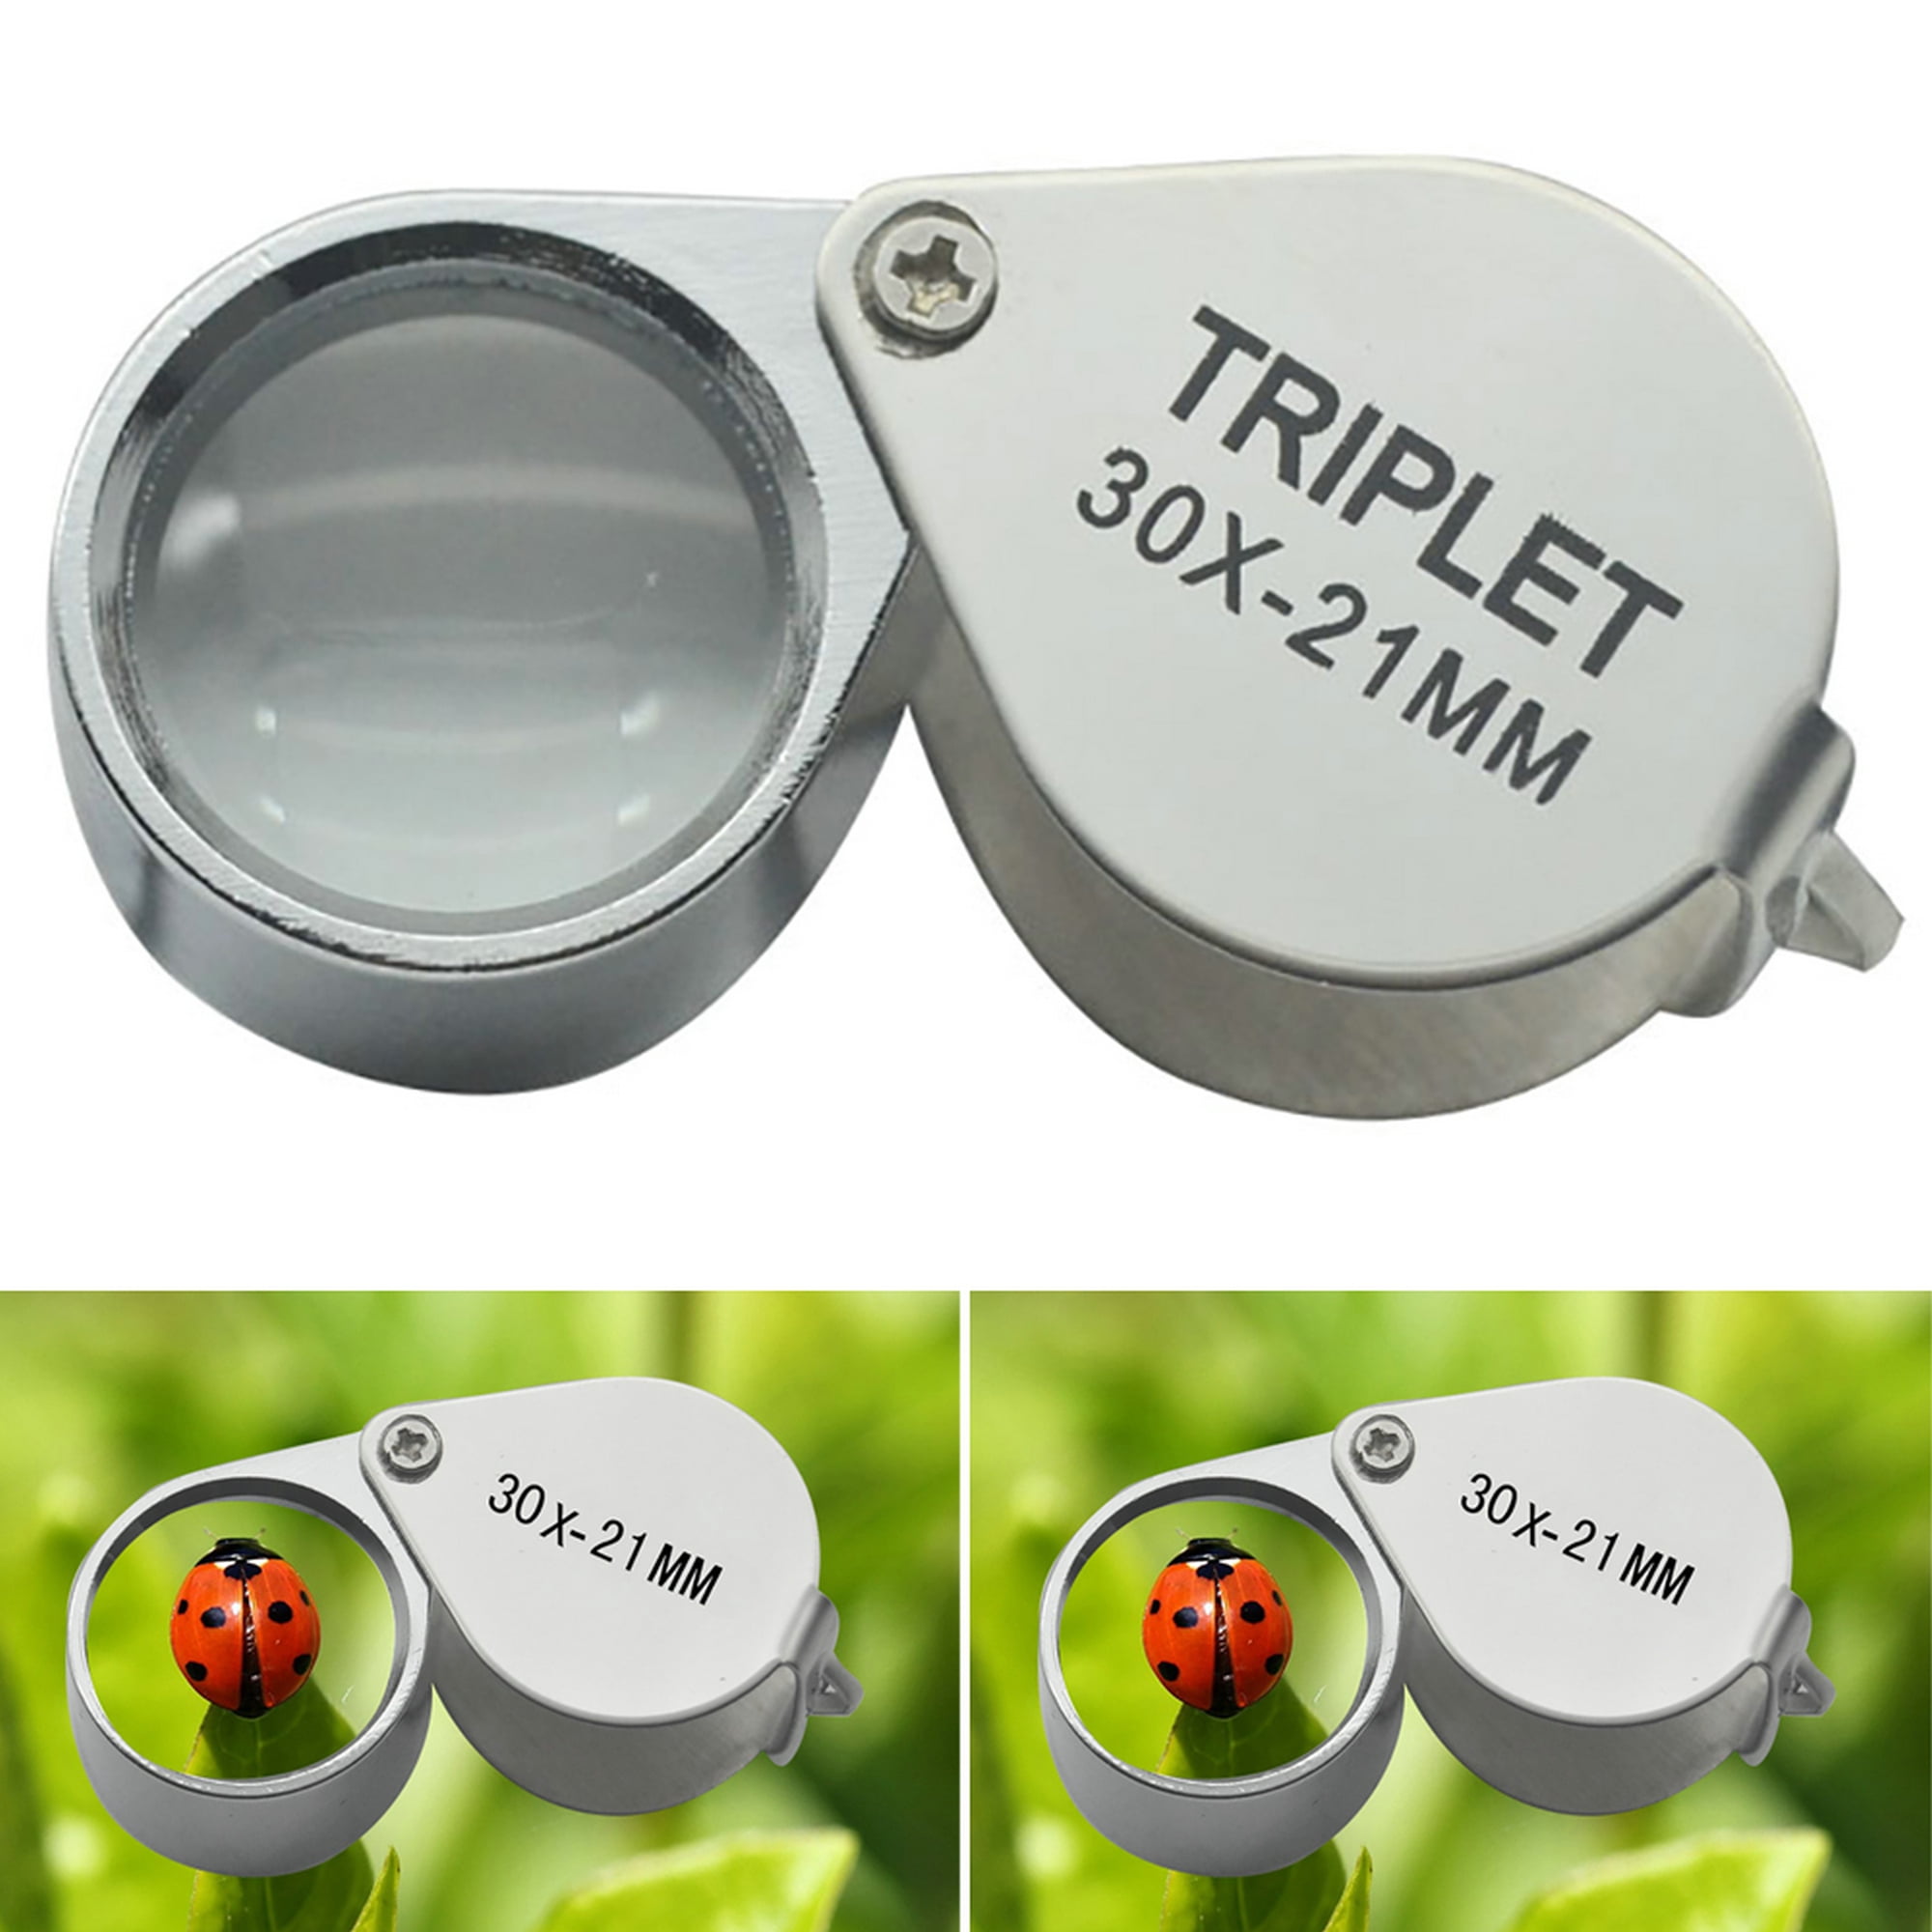 W&T Pocket Lens 30X 21mm Loupe Magnifying Eye Glass Magnifier lo 